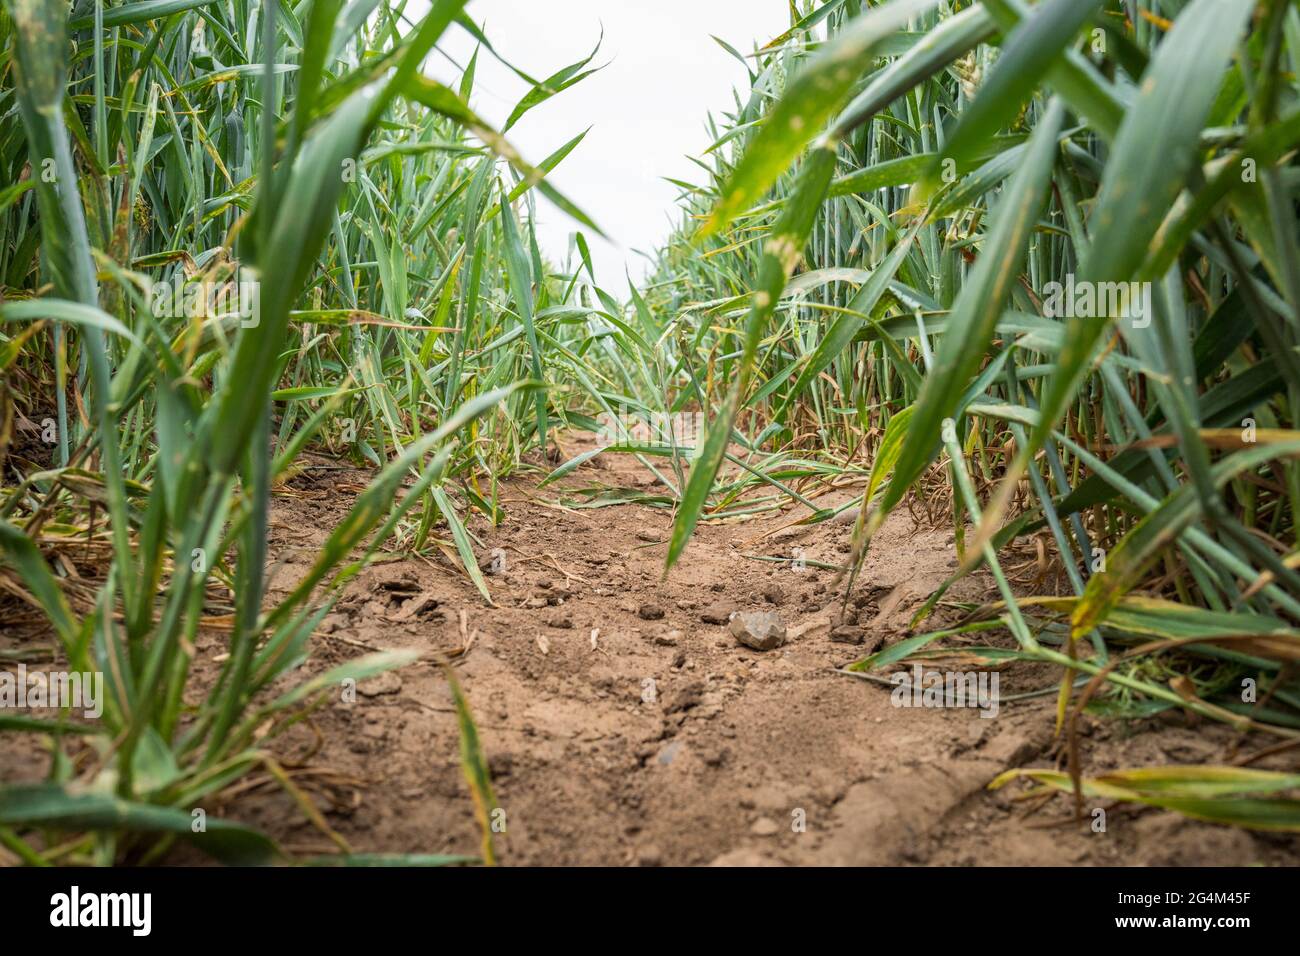 Wheat crop growing in hard dry conditions. Stock Photo